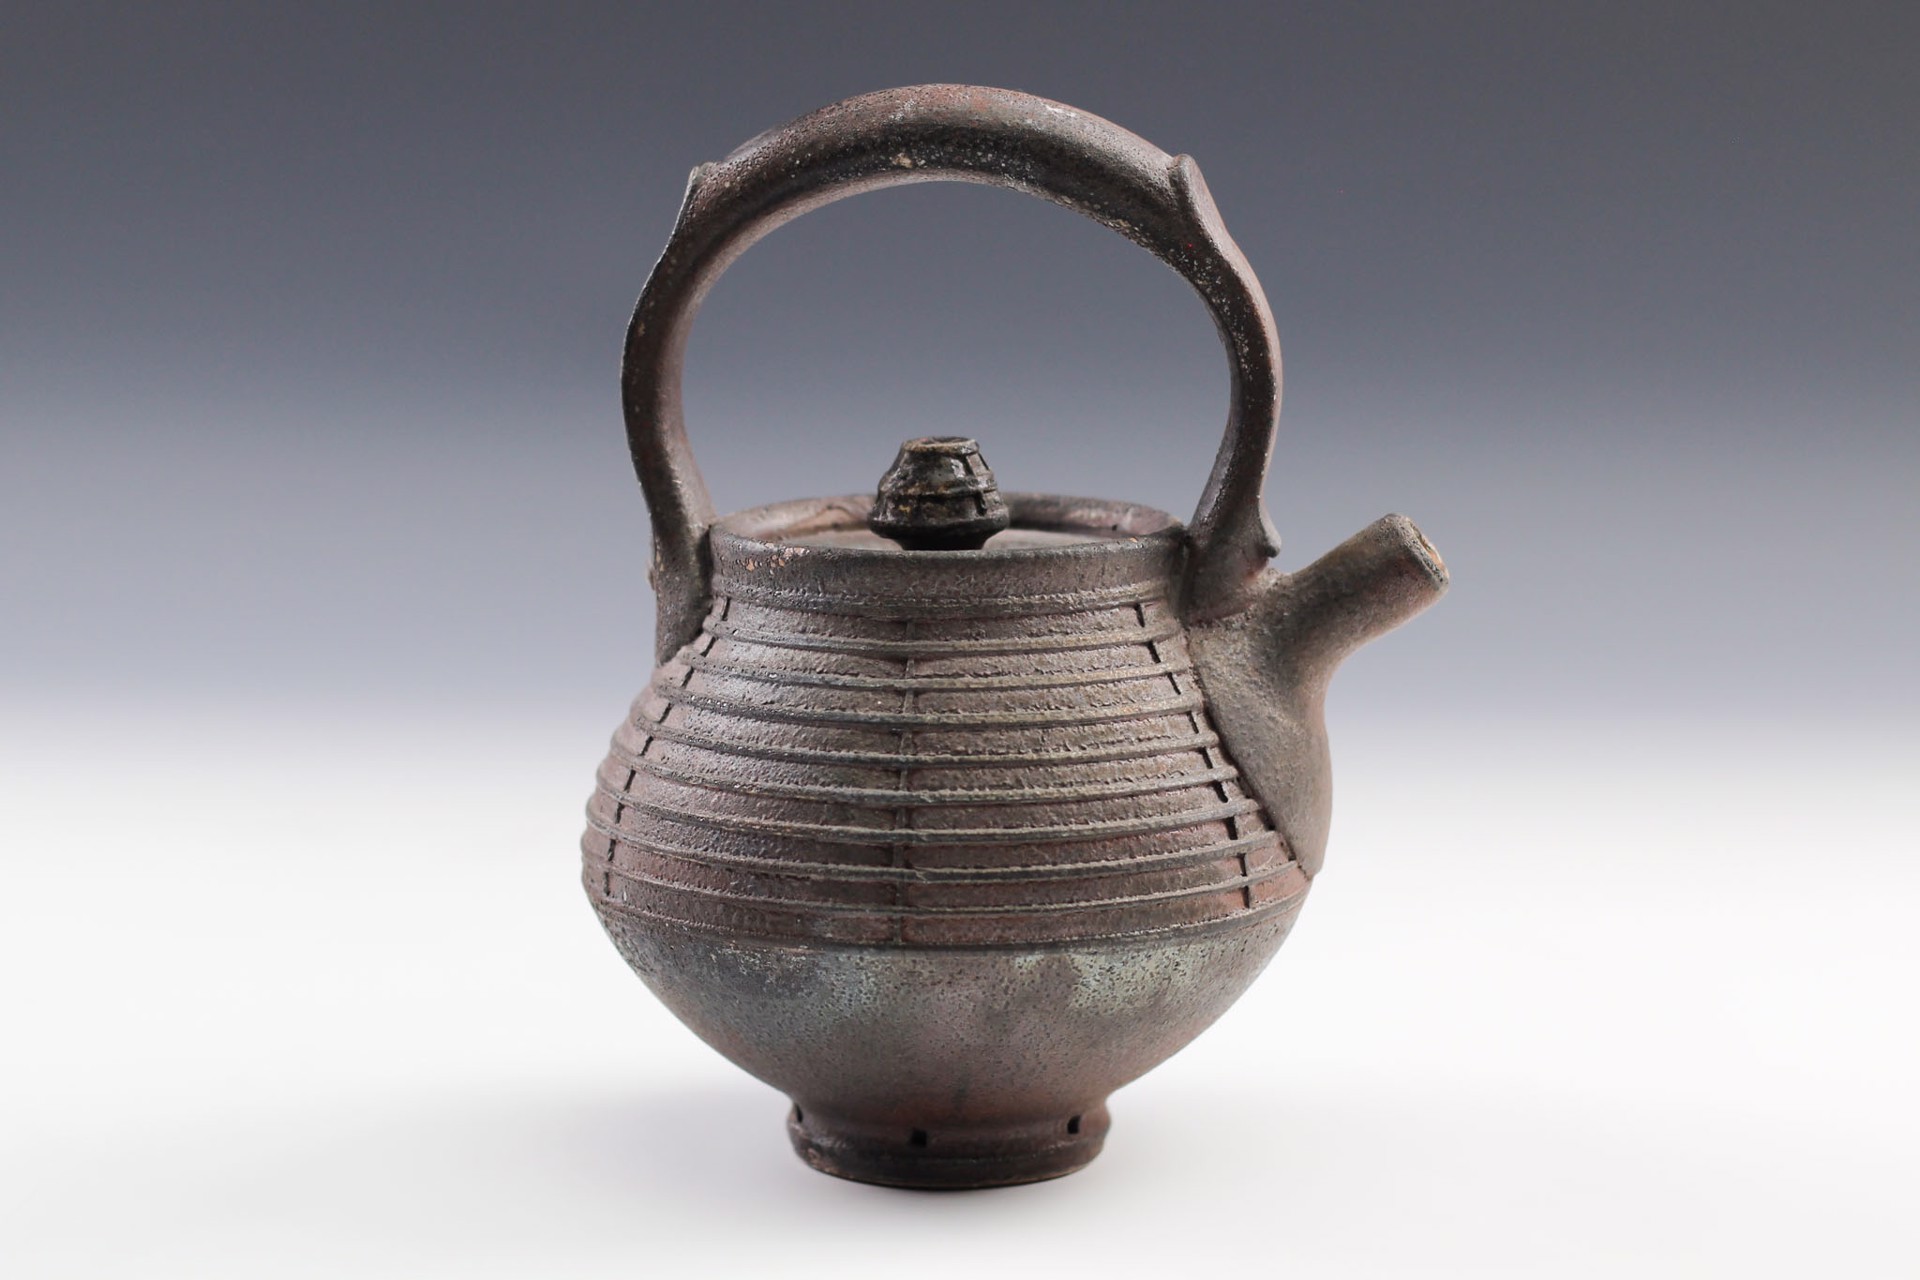 Teapot by Ted Neal